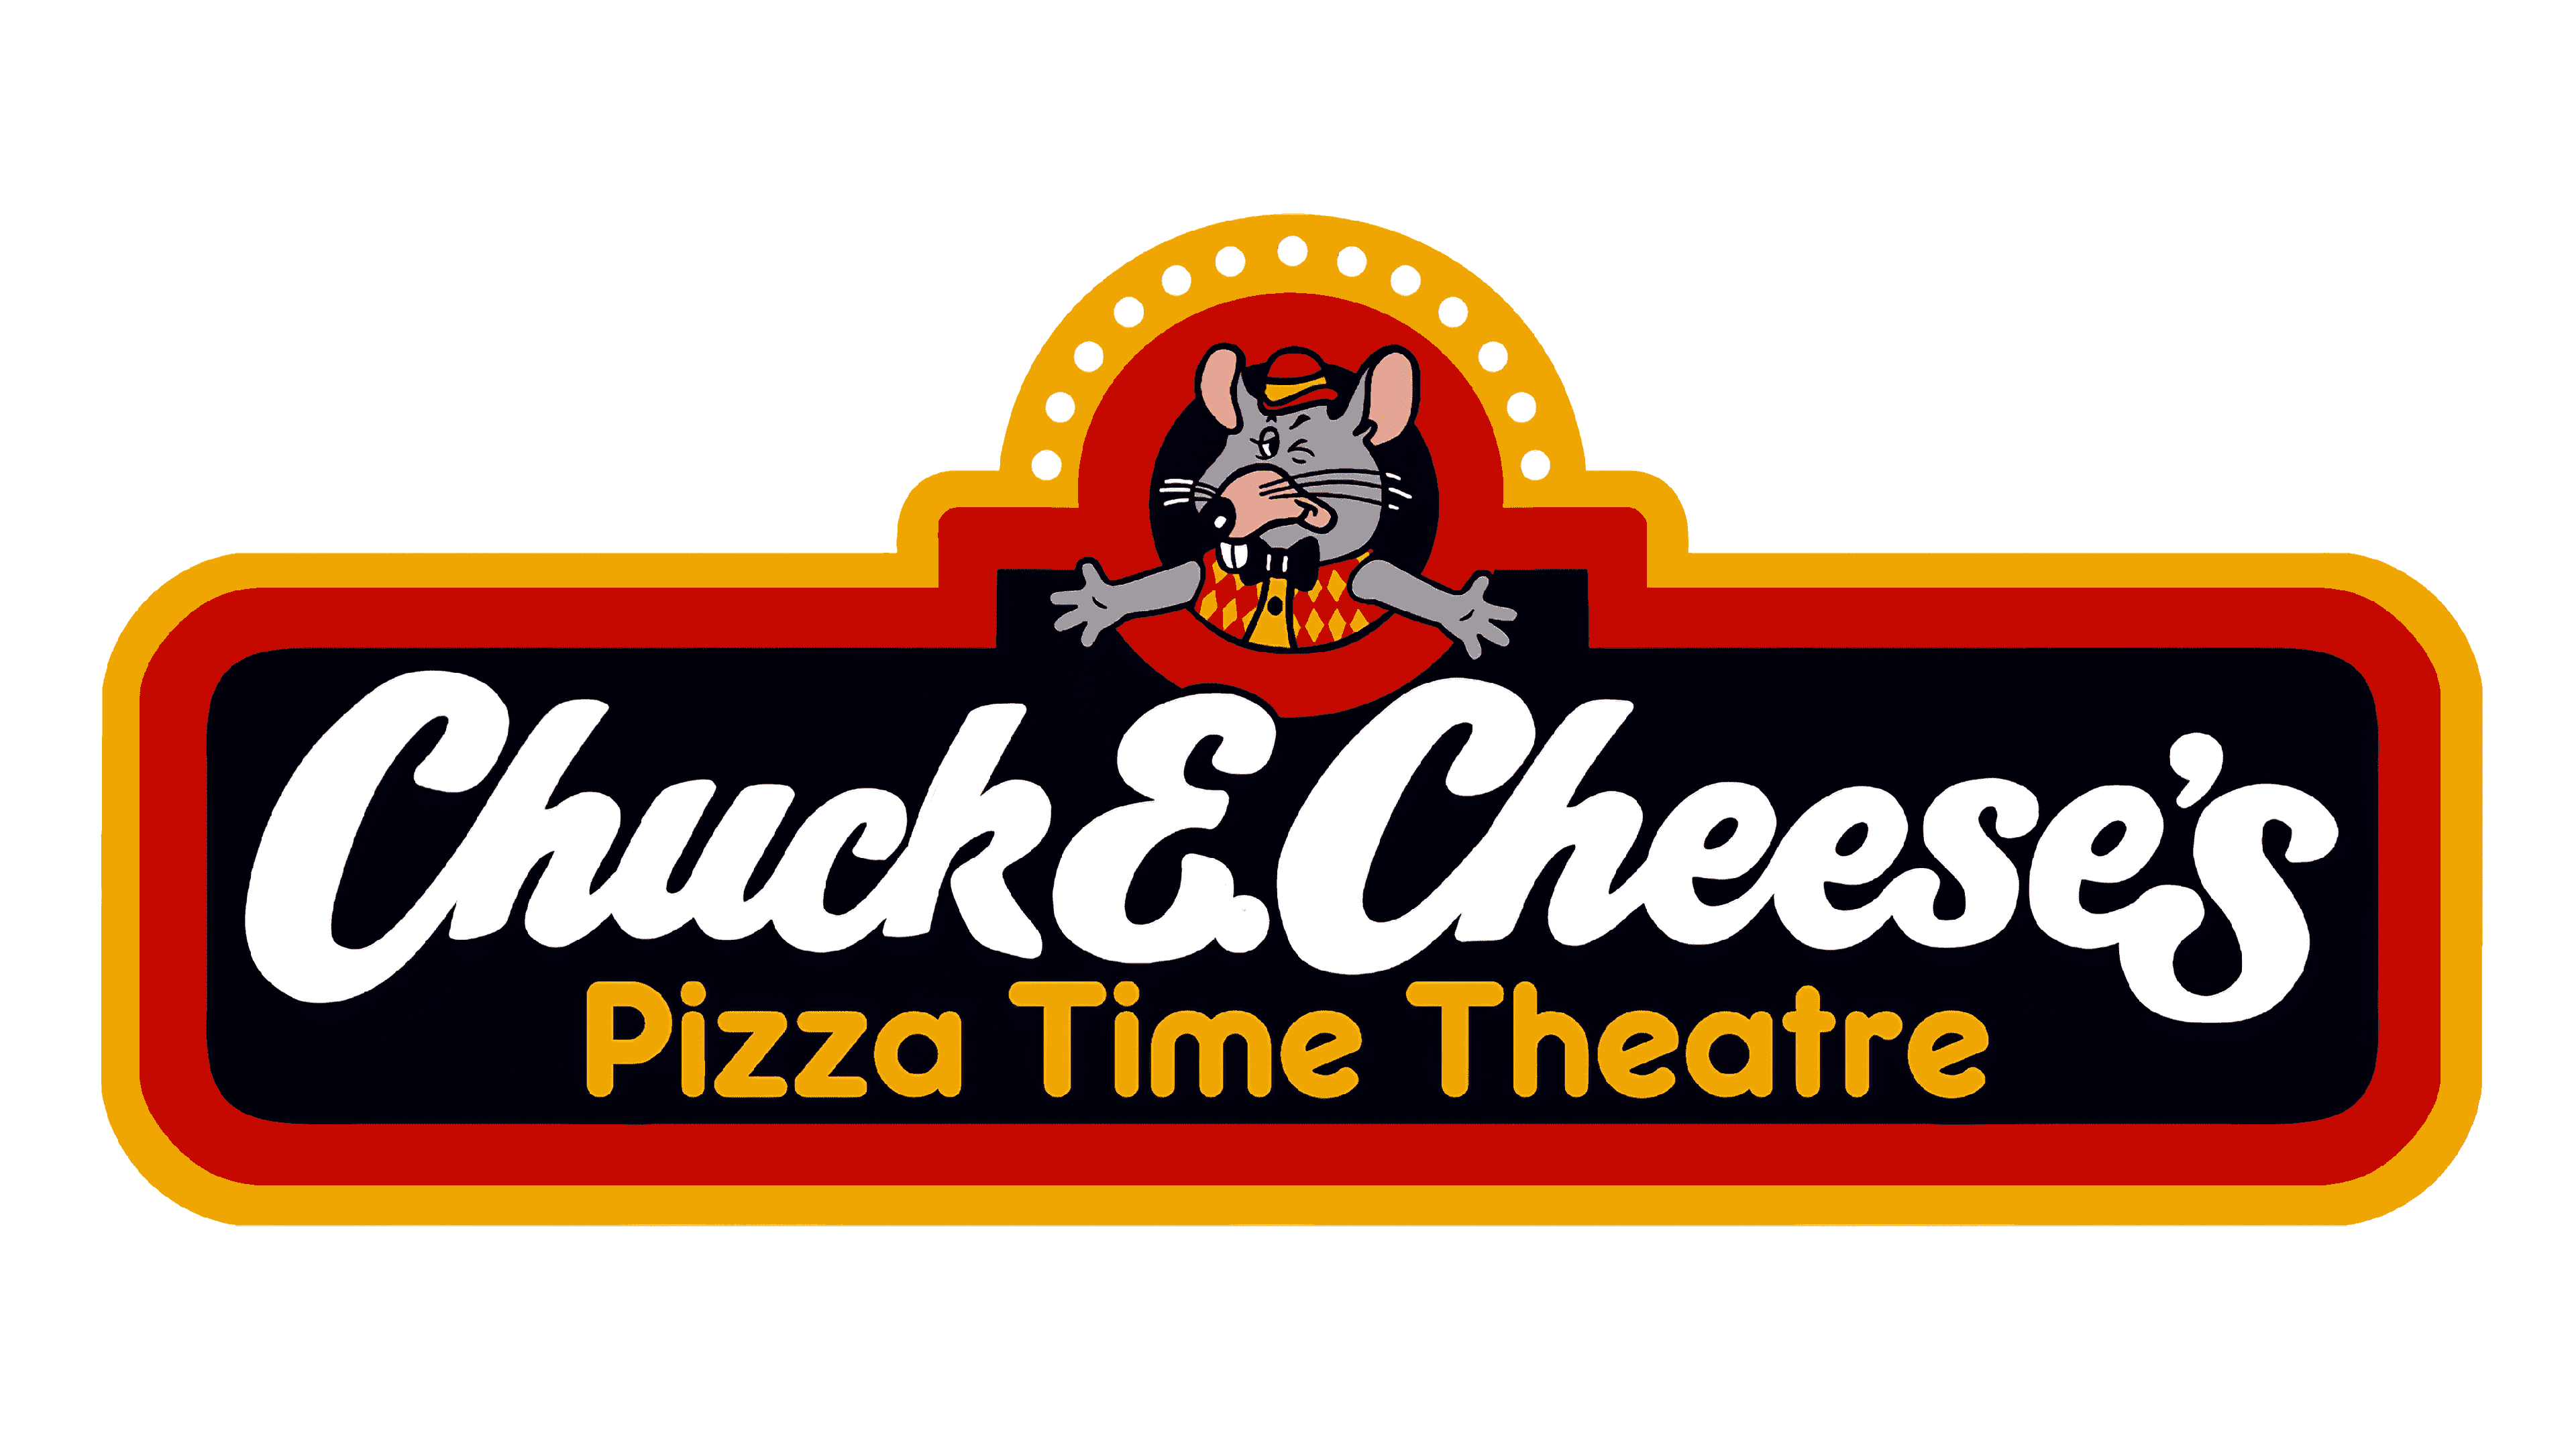 From Mouse To Star: The Chuck E. Cheese Logo History